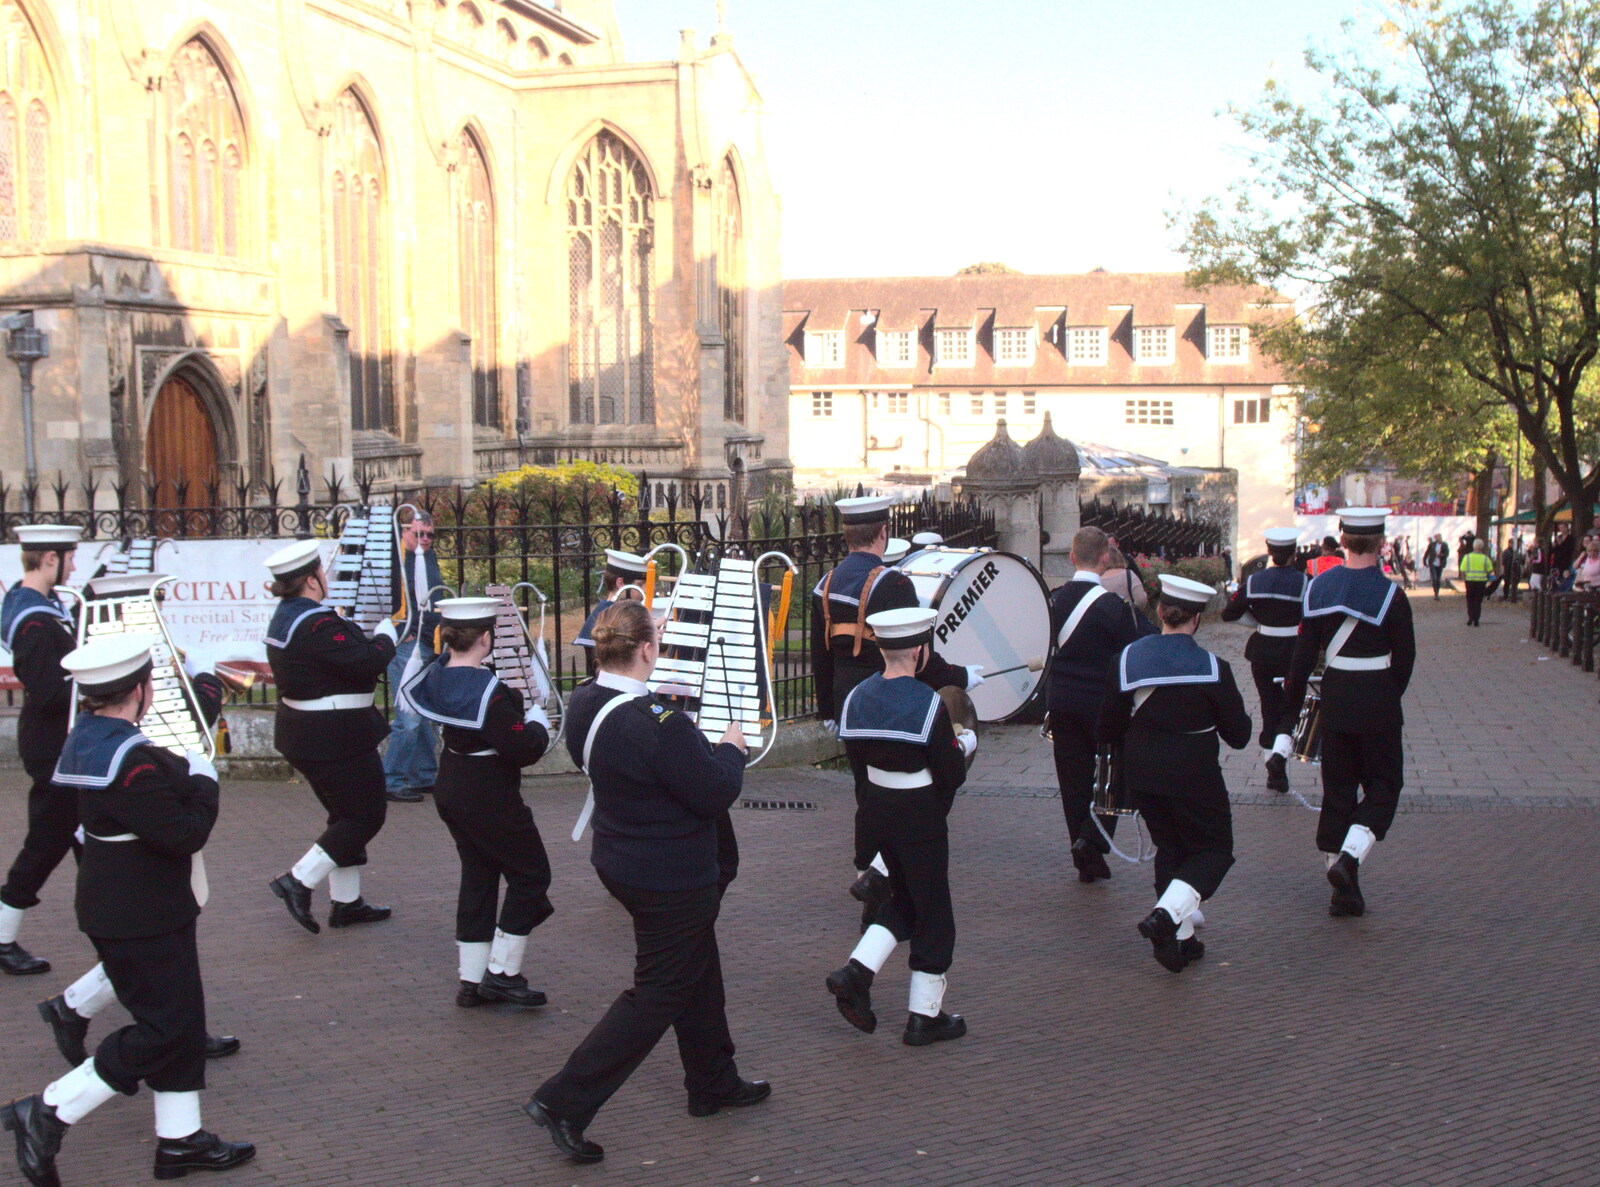 The band marches off from Trafalgar Day and Pizza, Norwich, Norfolk - 15th October 2017